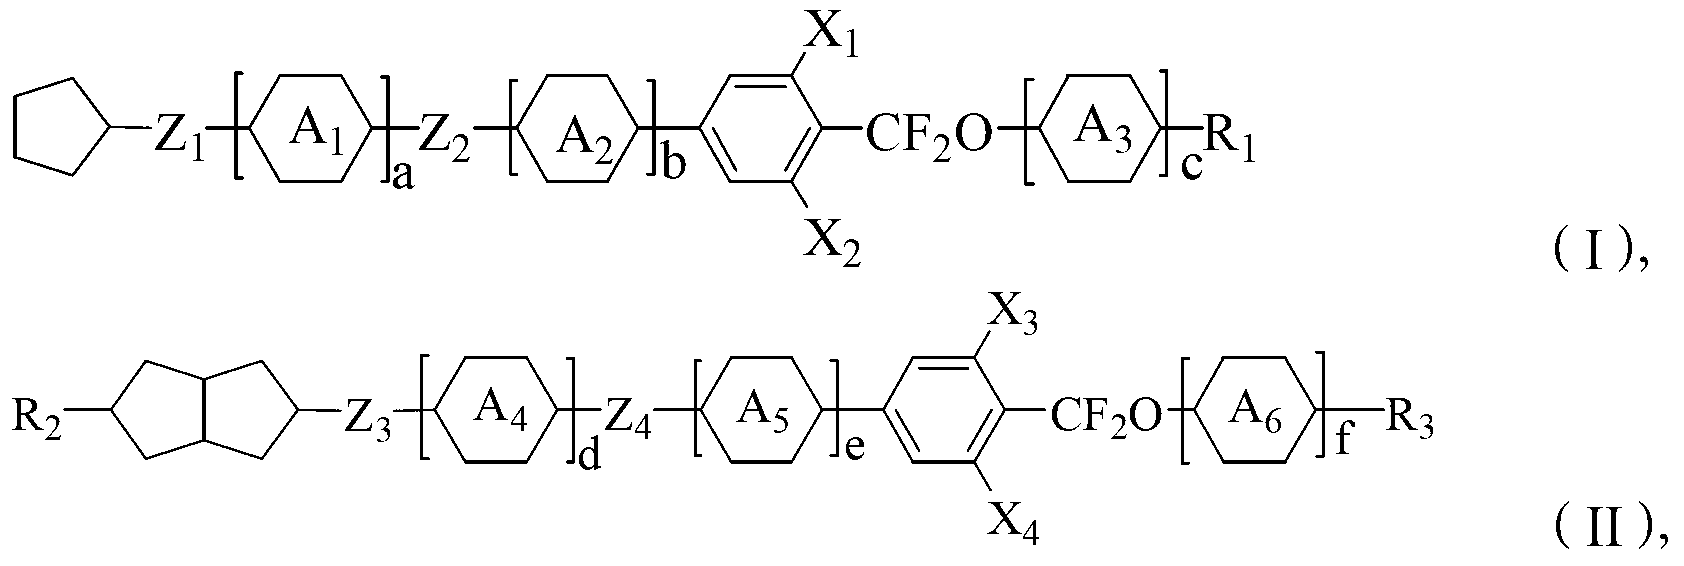 Liquid crystal composition containing difluoro methoxyl ether compounds